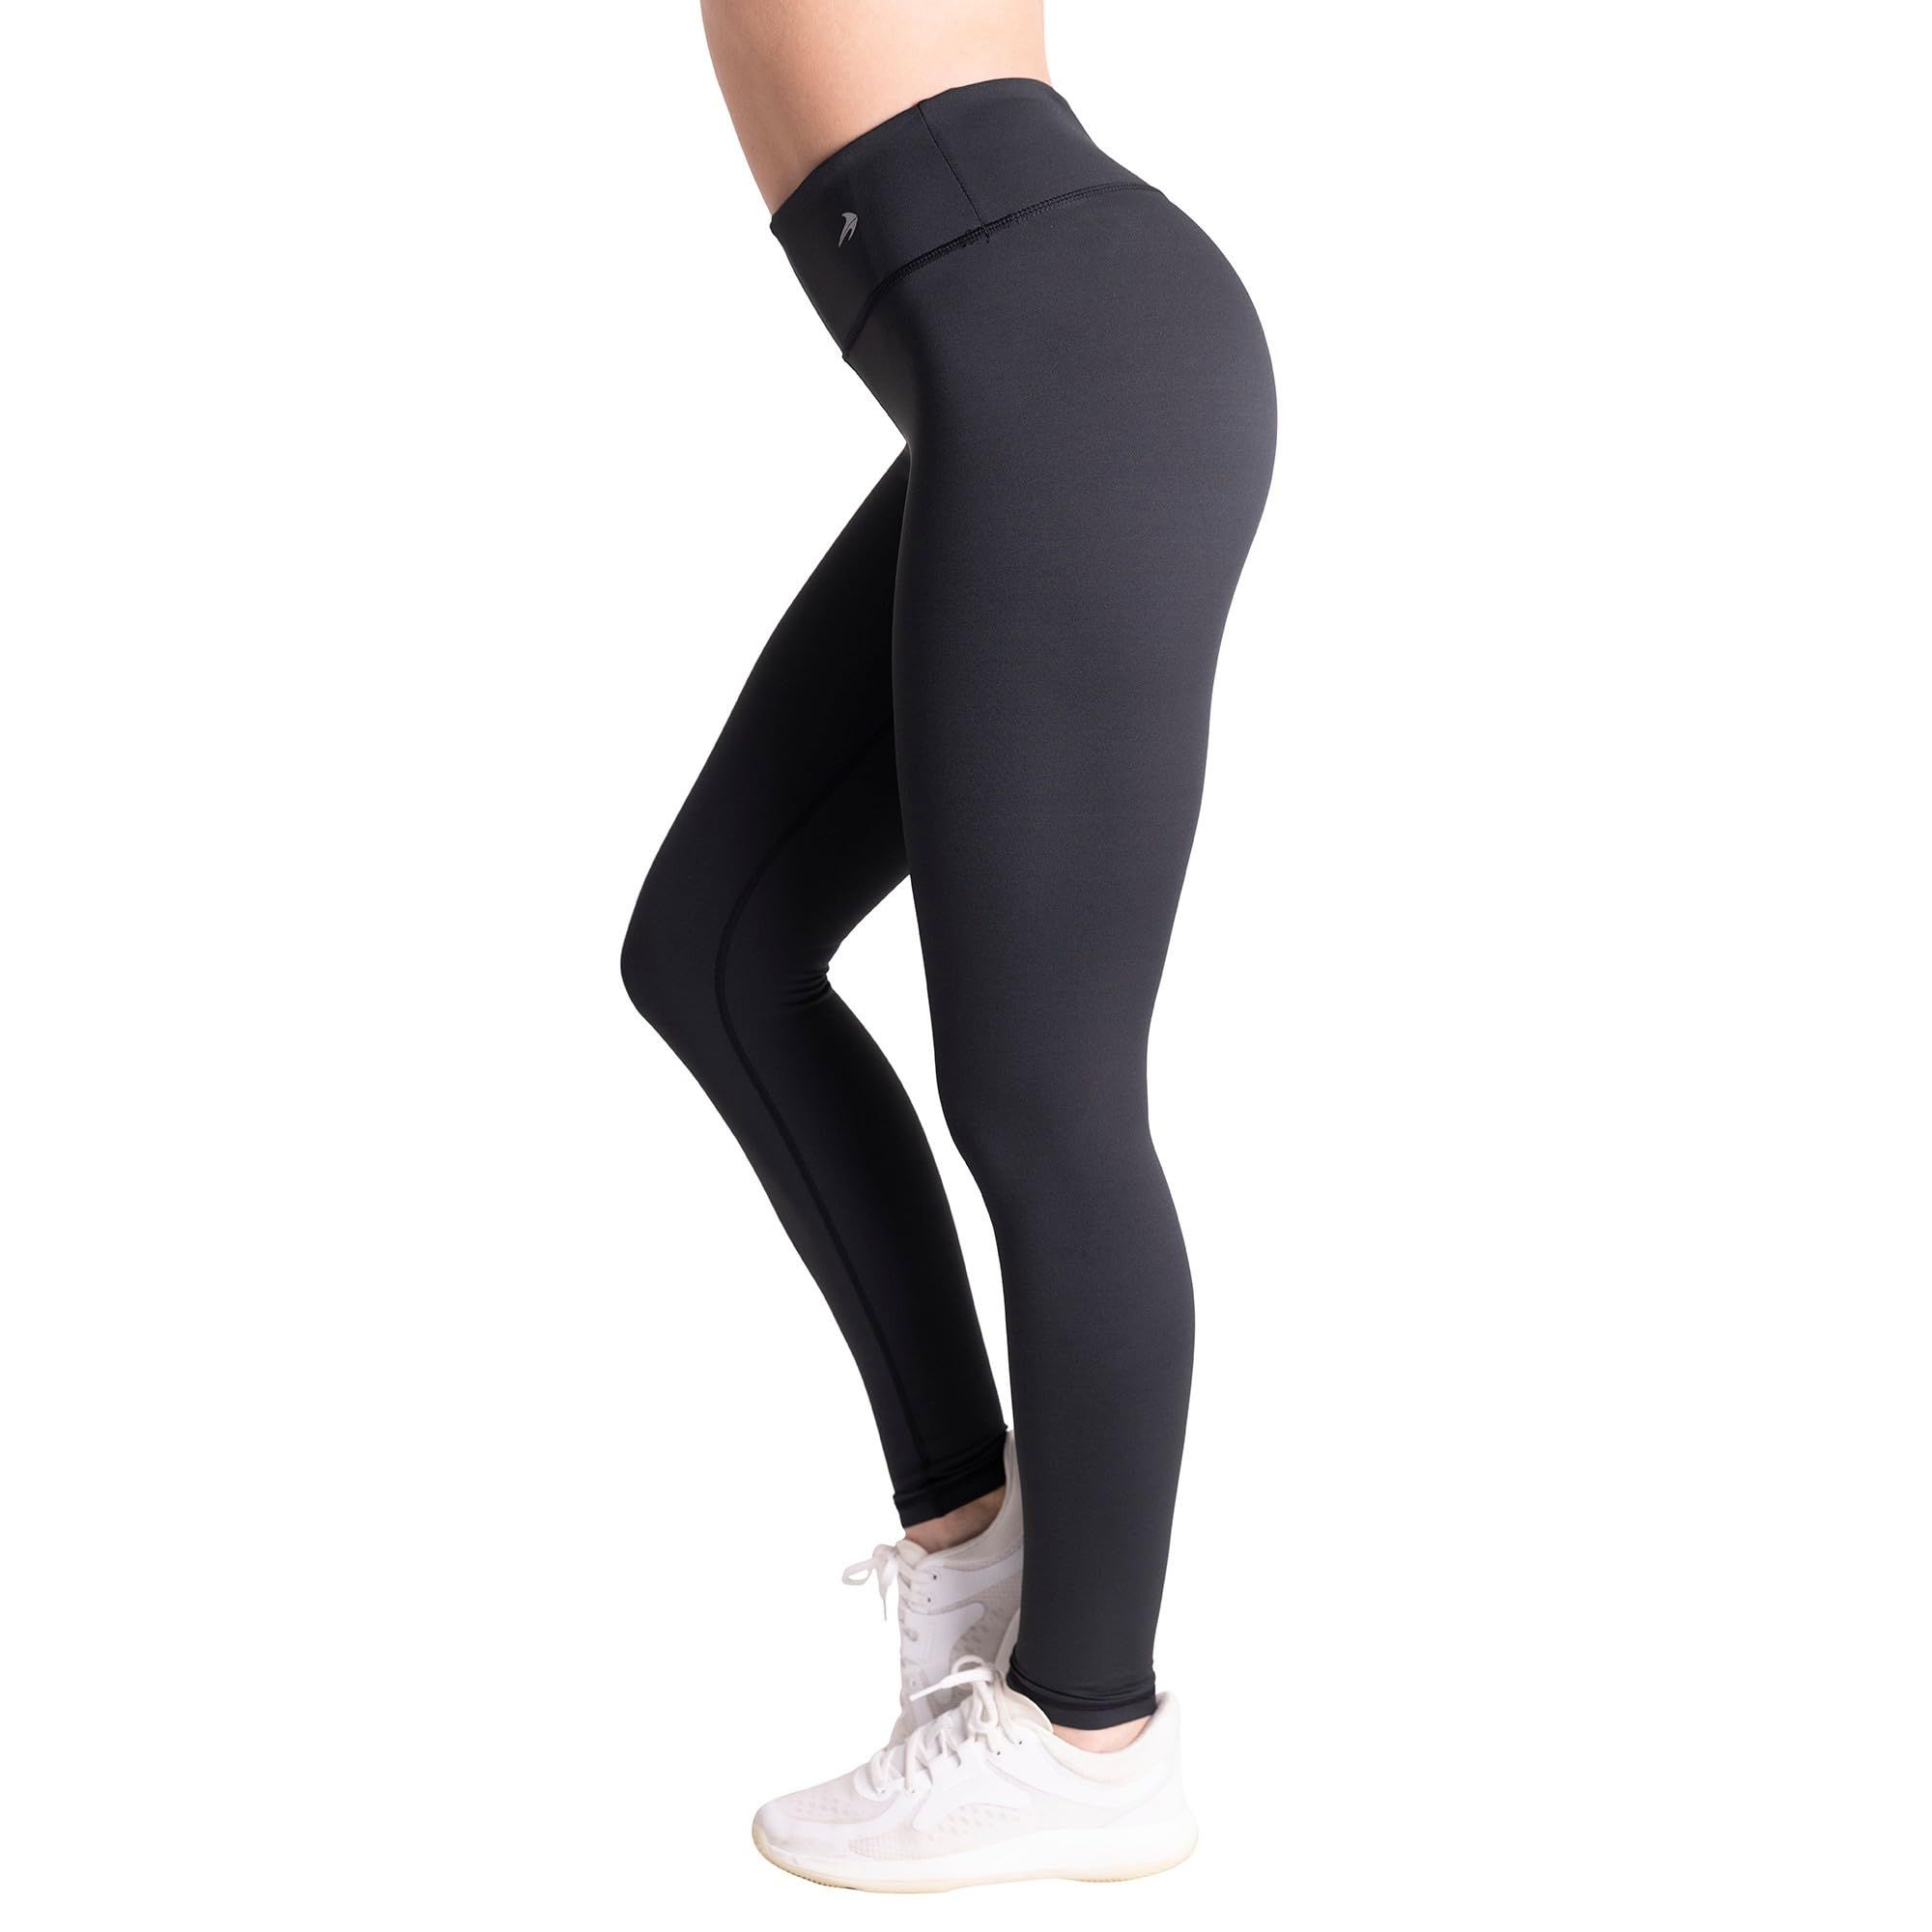 18 Best Compression Leggings and Tights for Women 2021